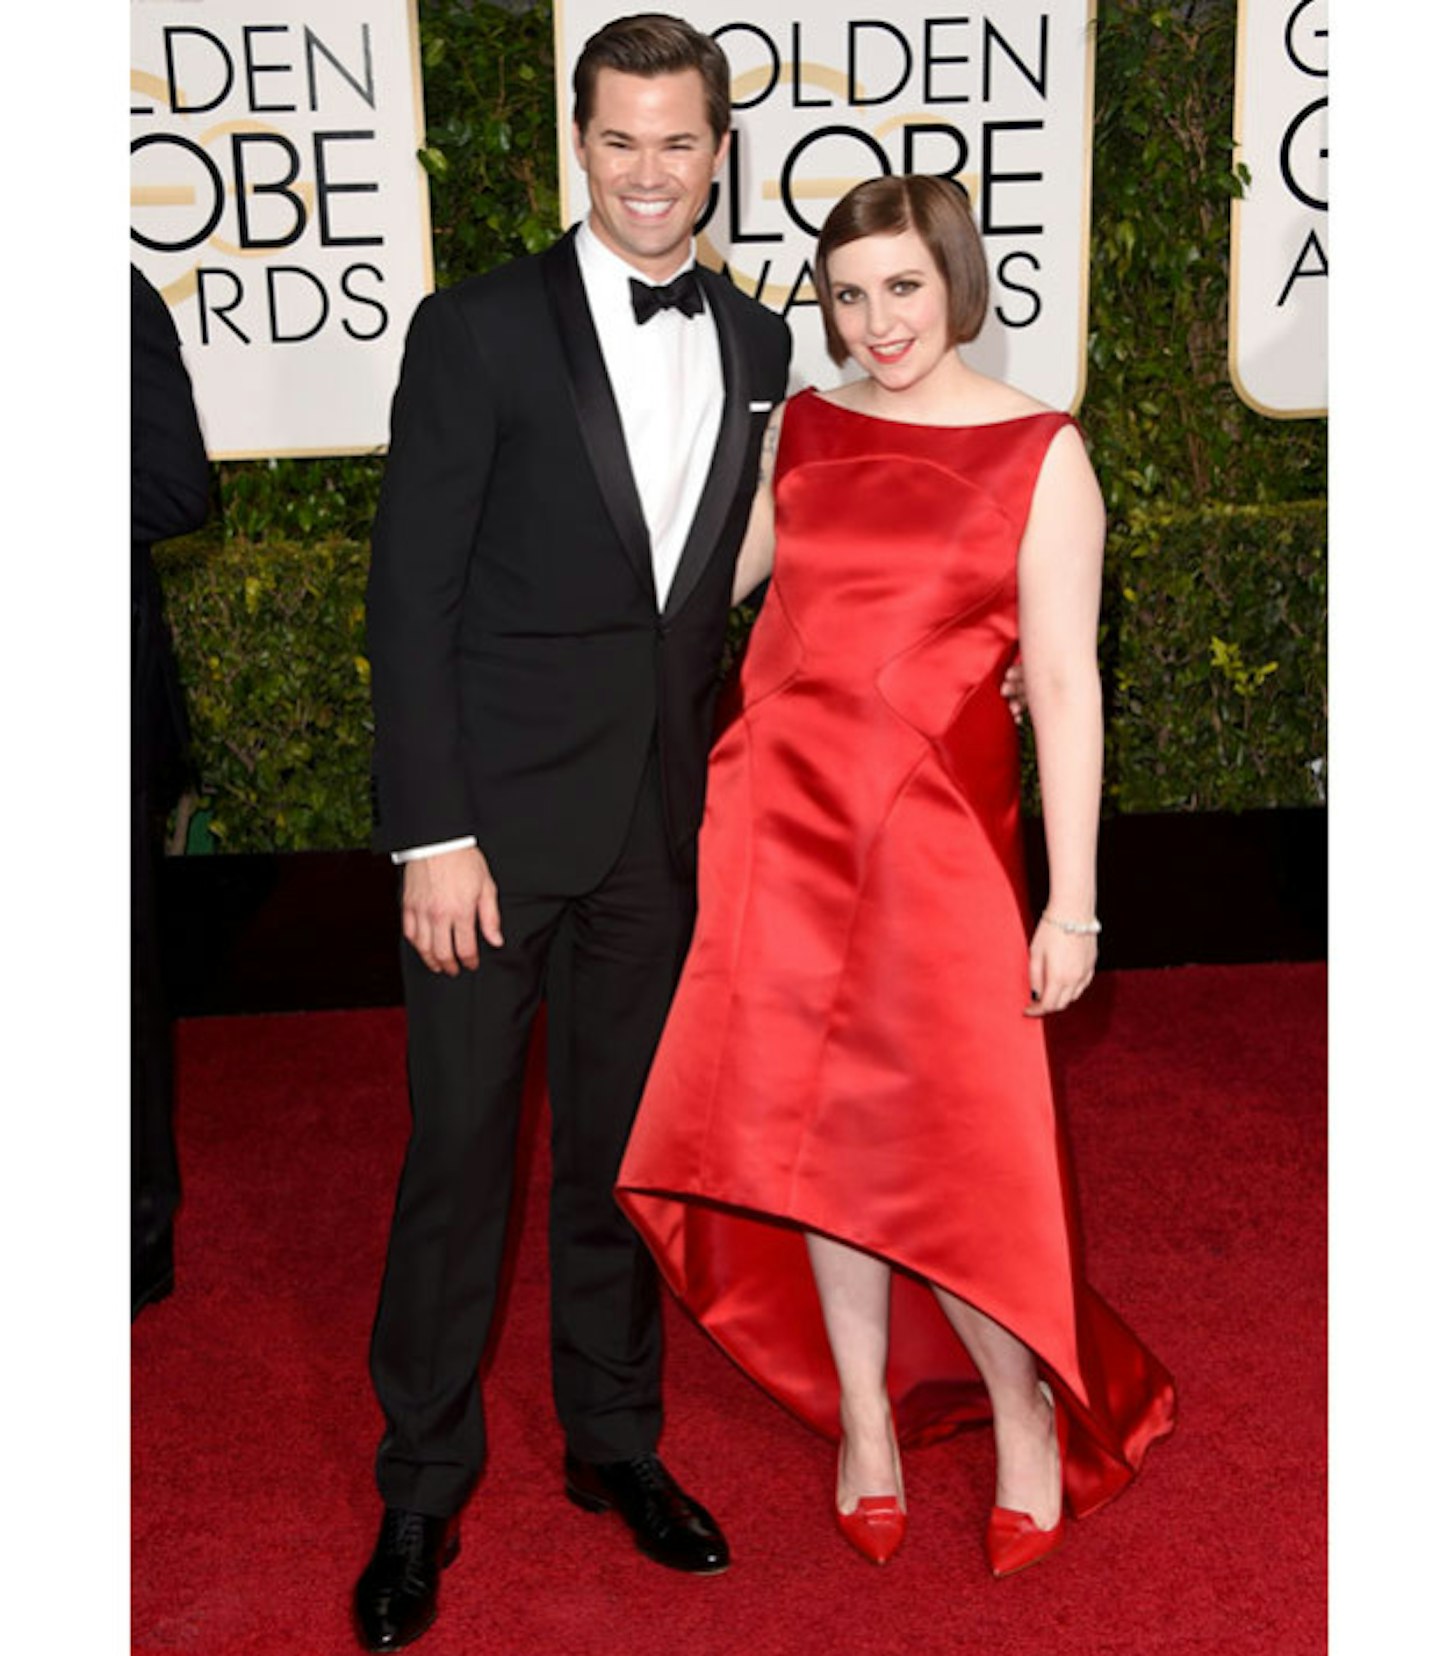 Lena Dunham and Andrew Rannells